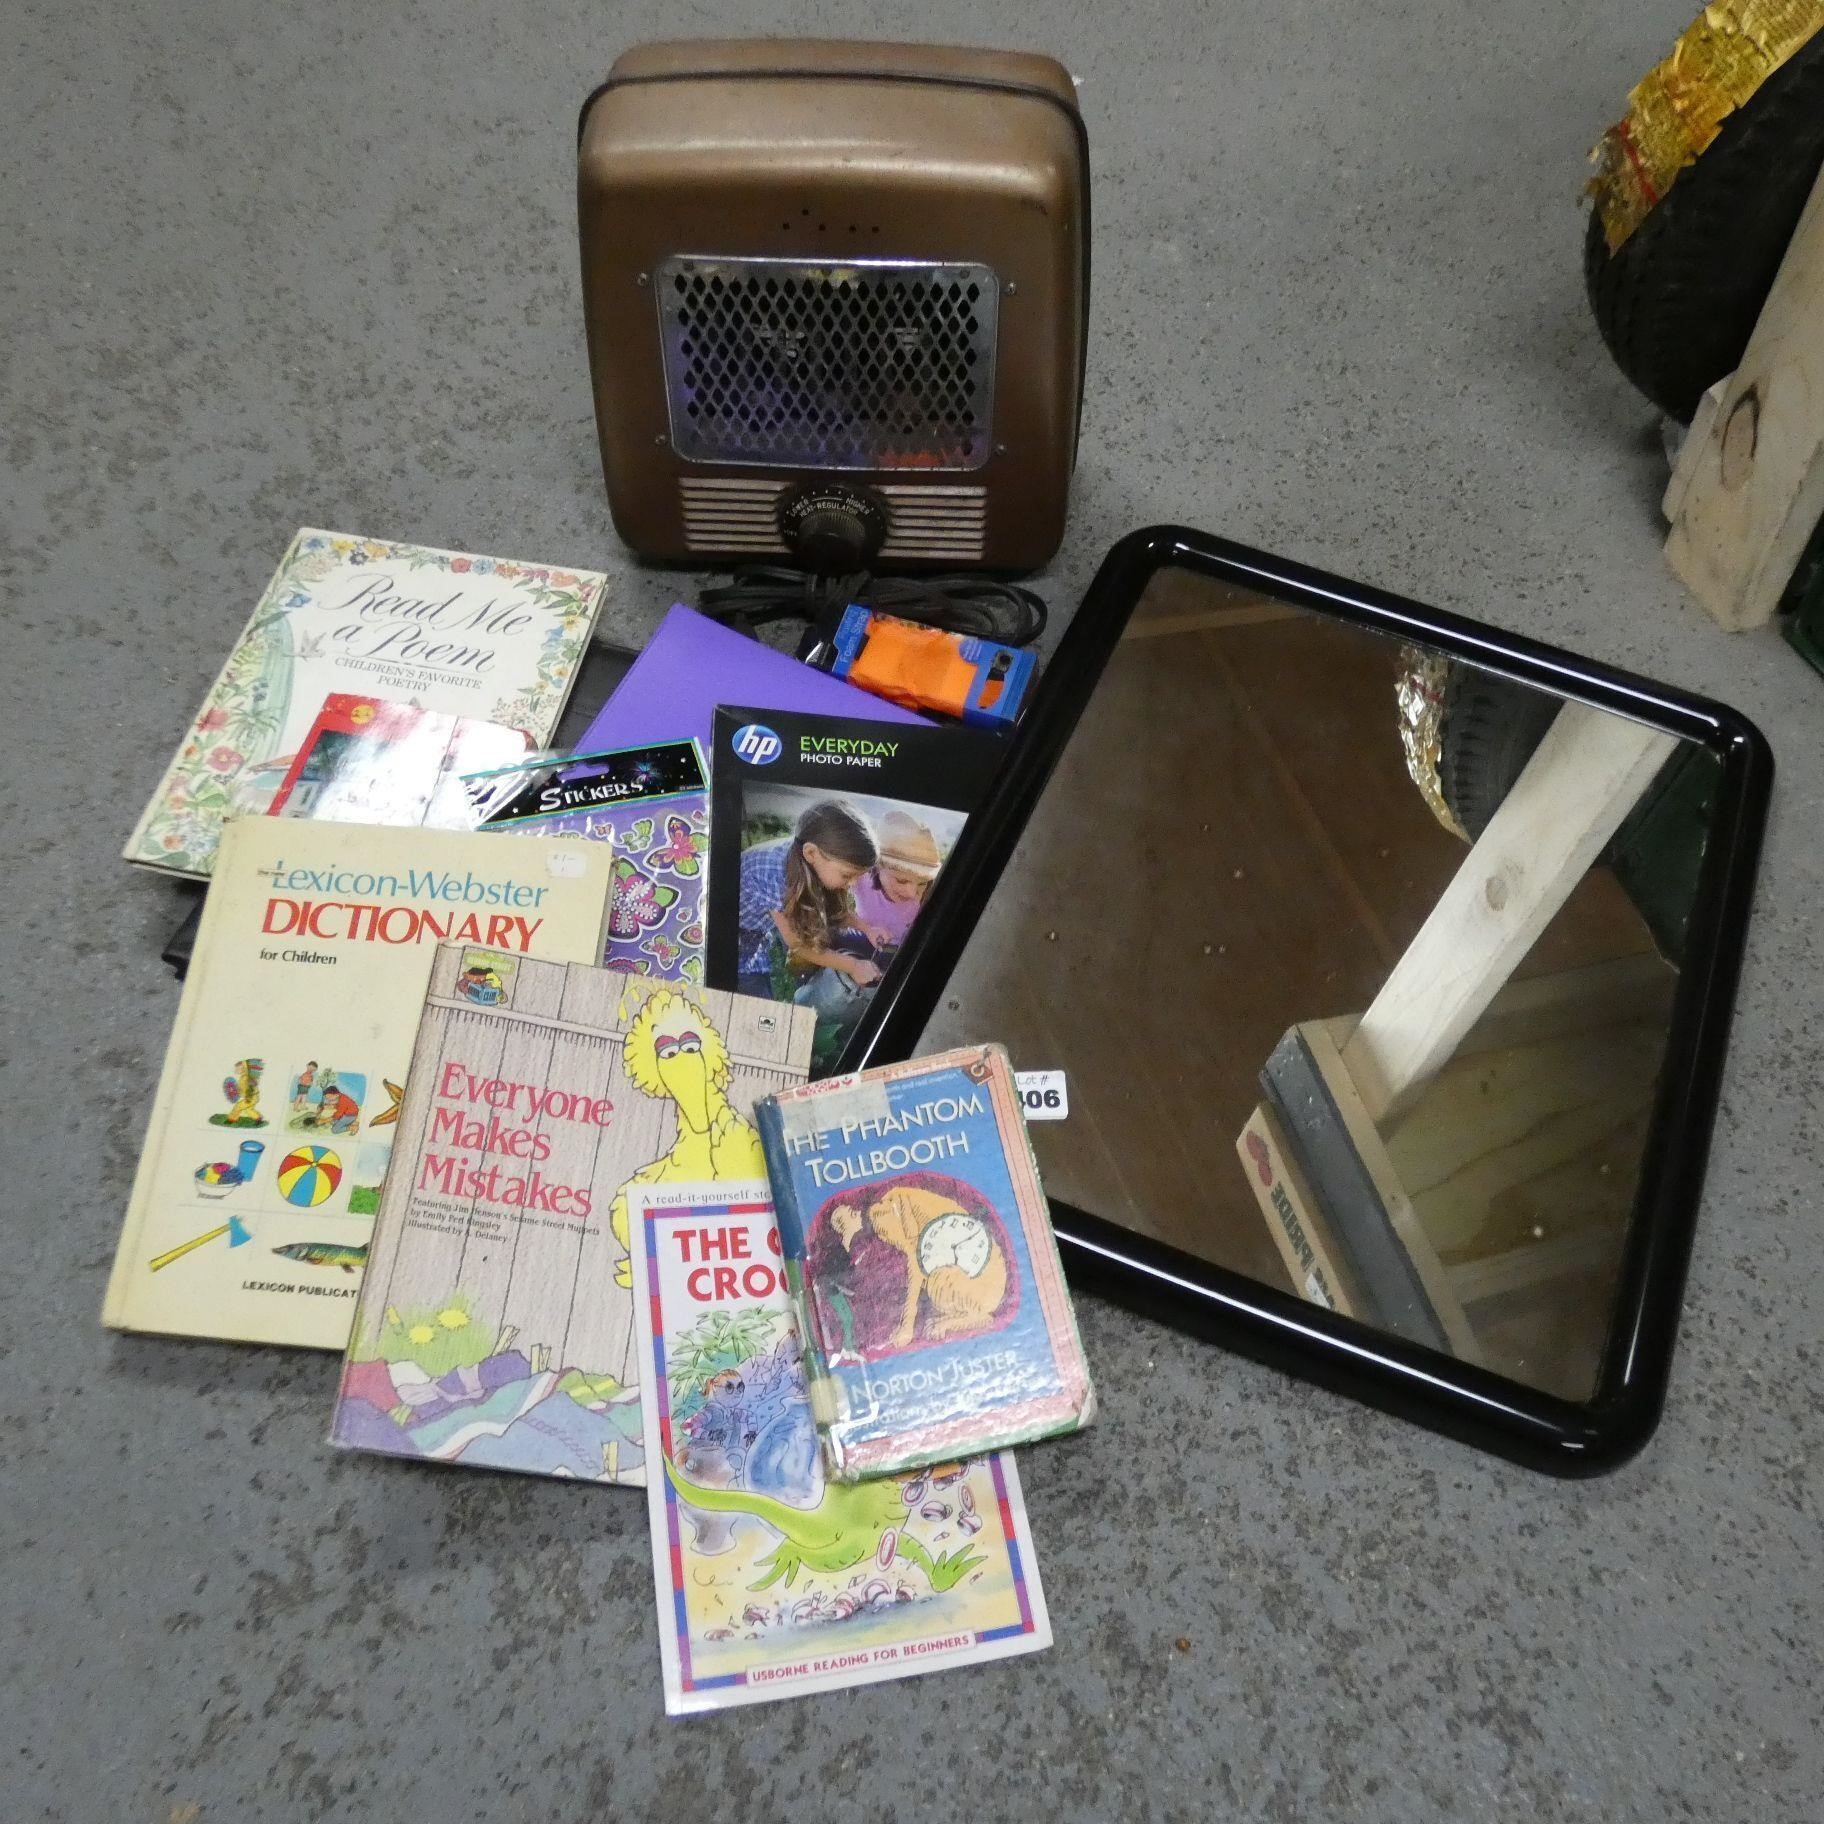 Vintage Portable Heater & Assorted Books